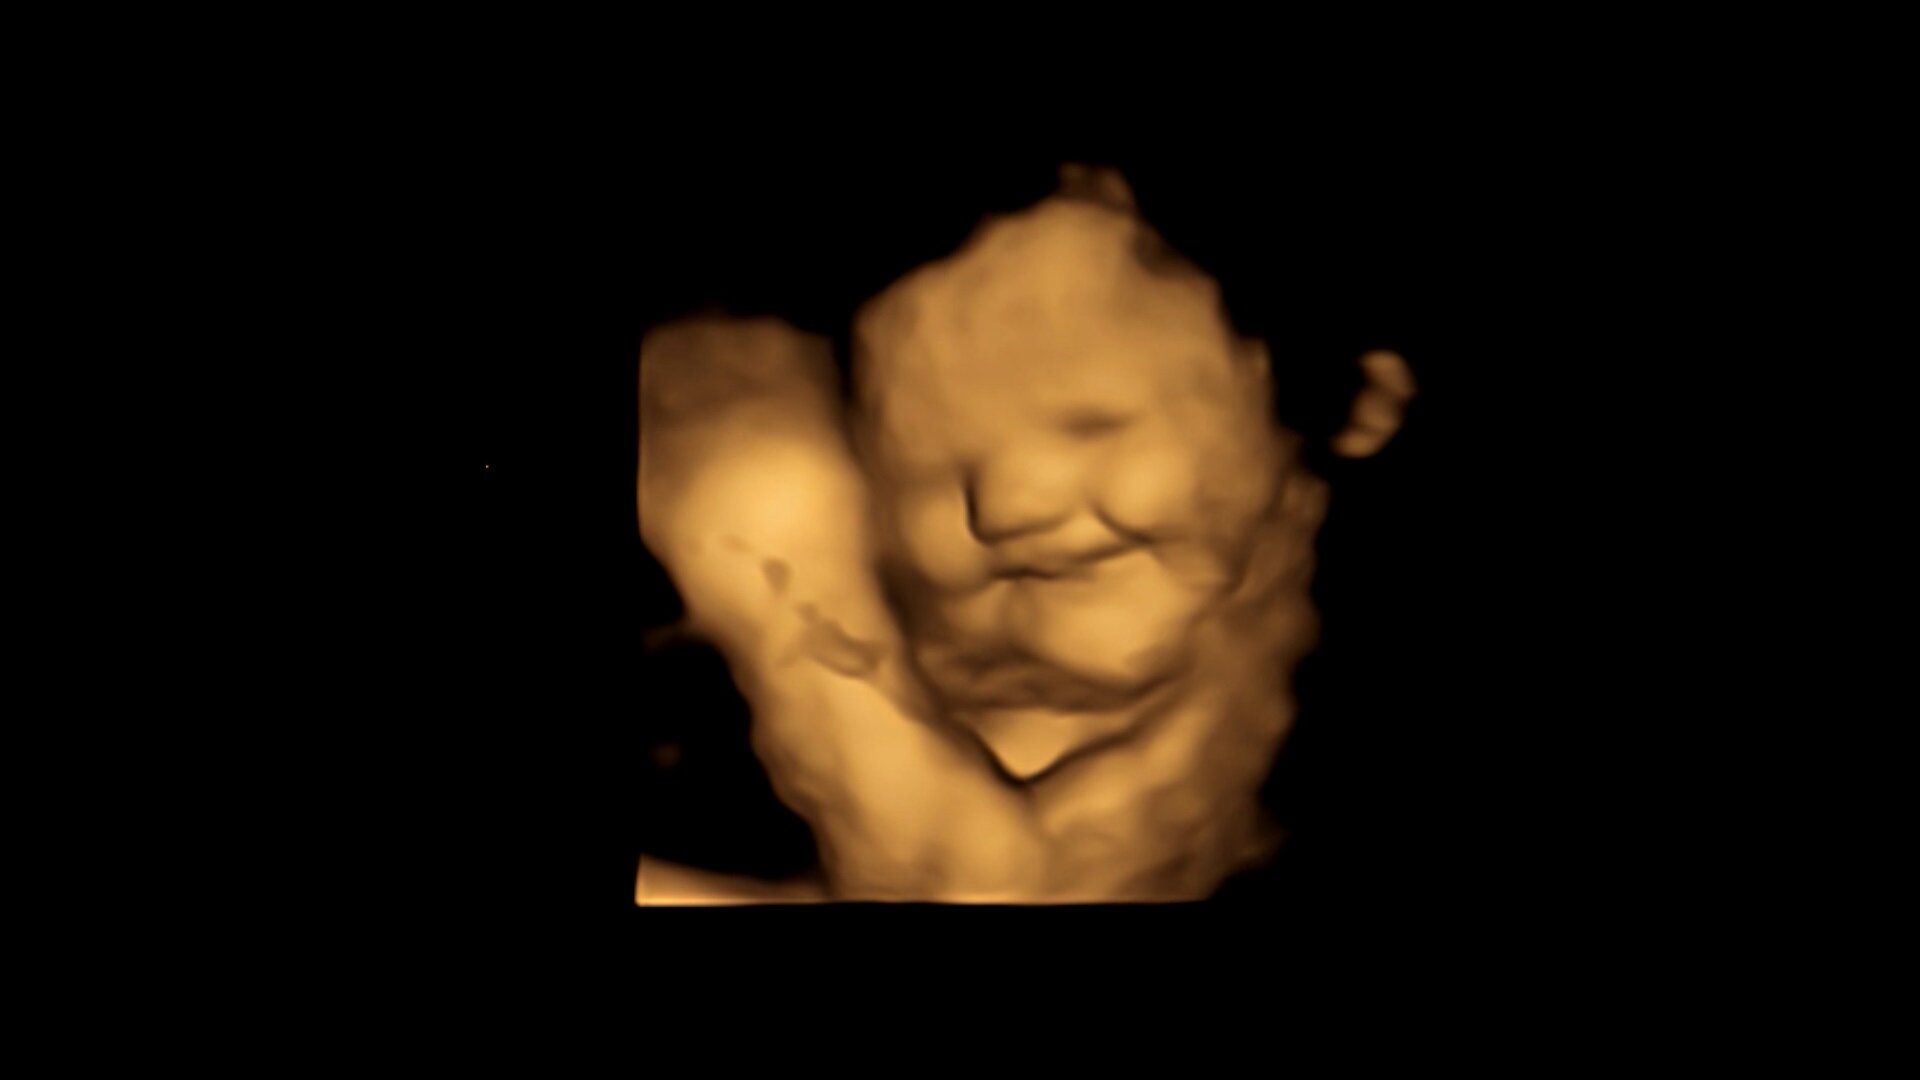 Image of a 4D scan of a fetus showing a laughing face reaction after being exposed to carrot flavor / Credit: FETAP (Fetal Taste Preferences) Study, Fetal and Neonatal Research Laboratory, University of Durham